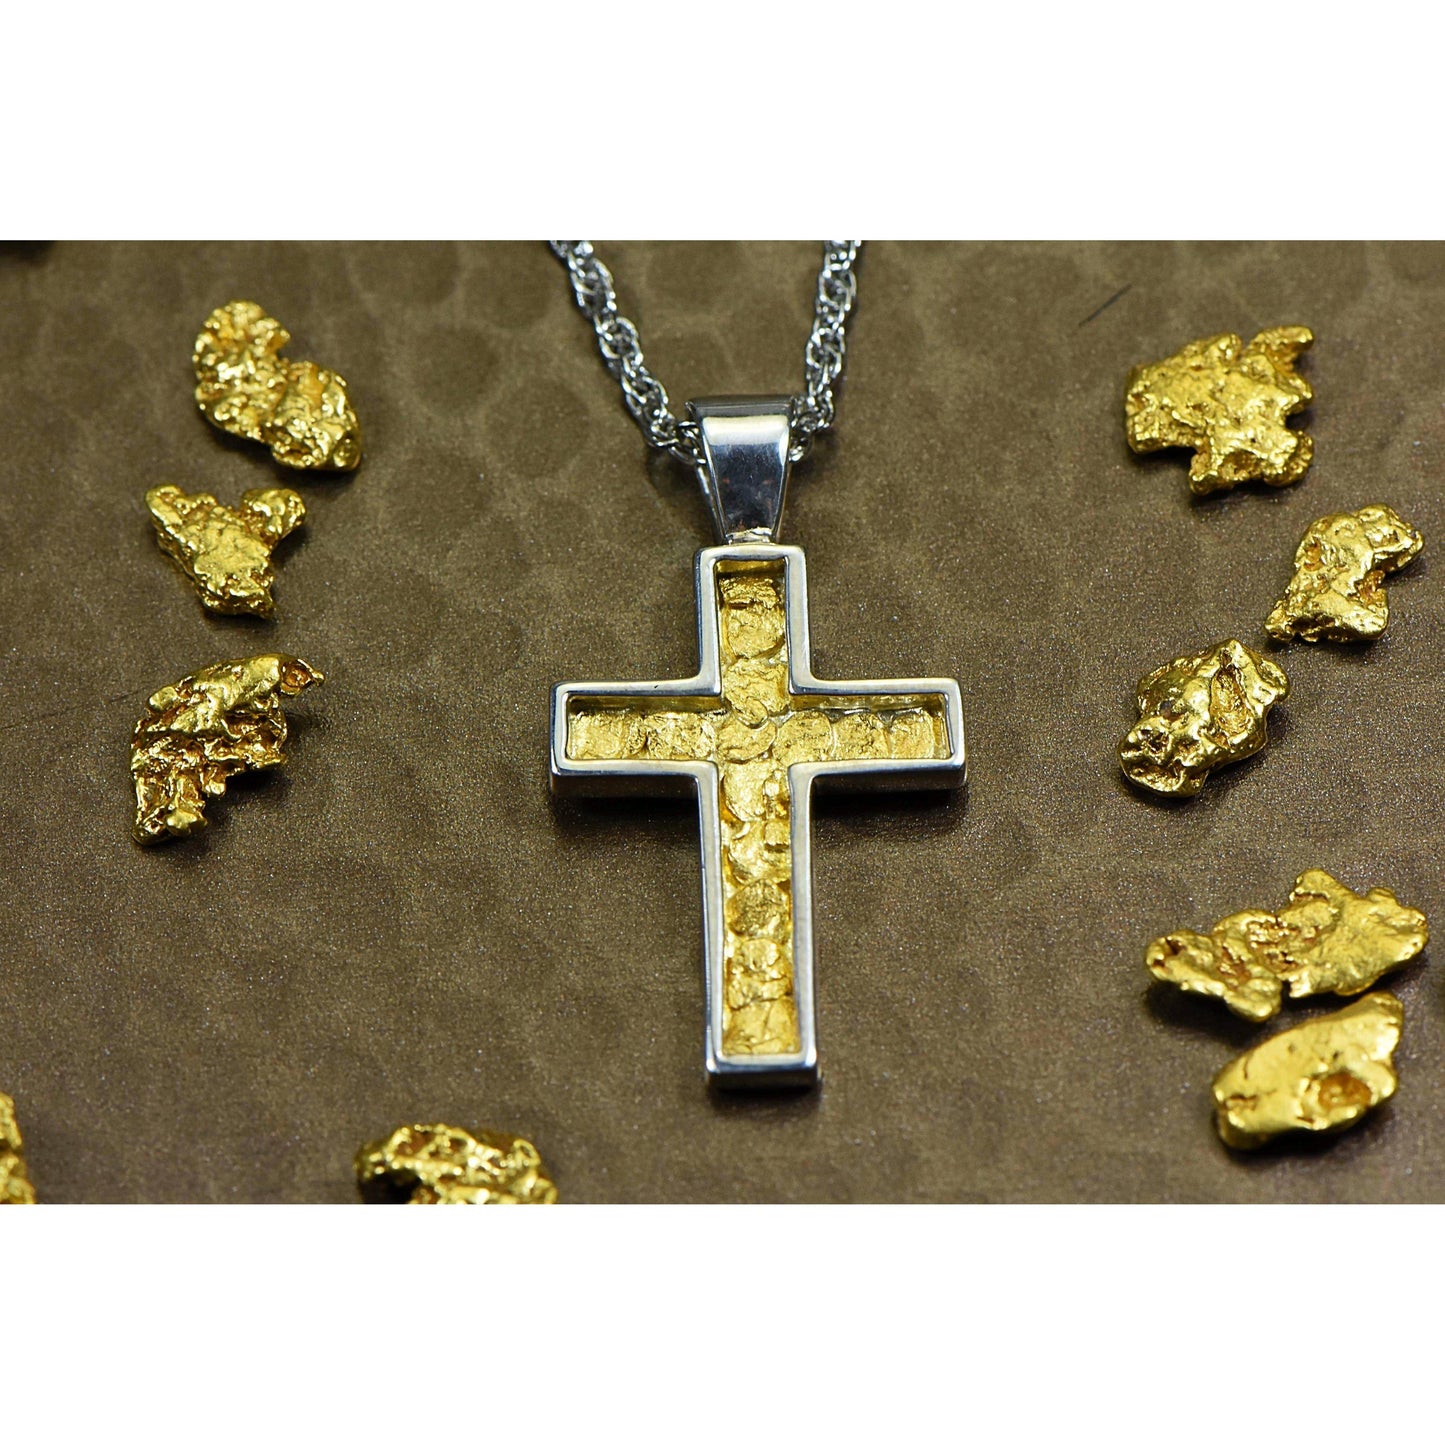 Orocal Gold Nugget Cross Sterling Silver Pendant PCR21NSS-Destination Gold Detectors